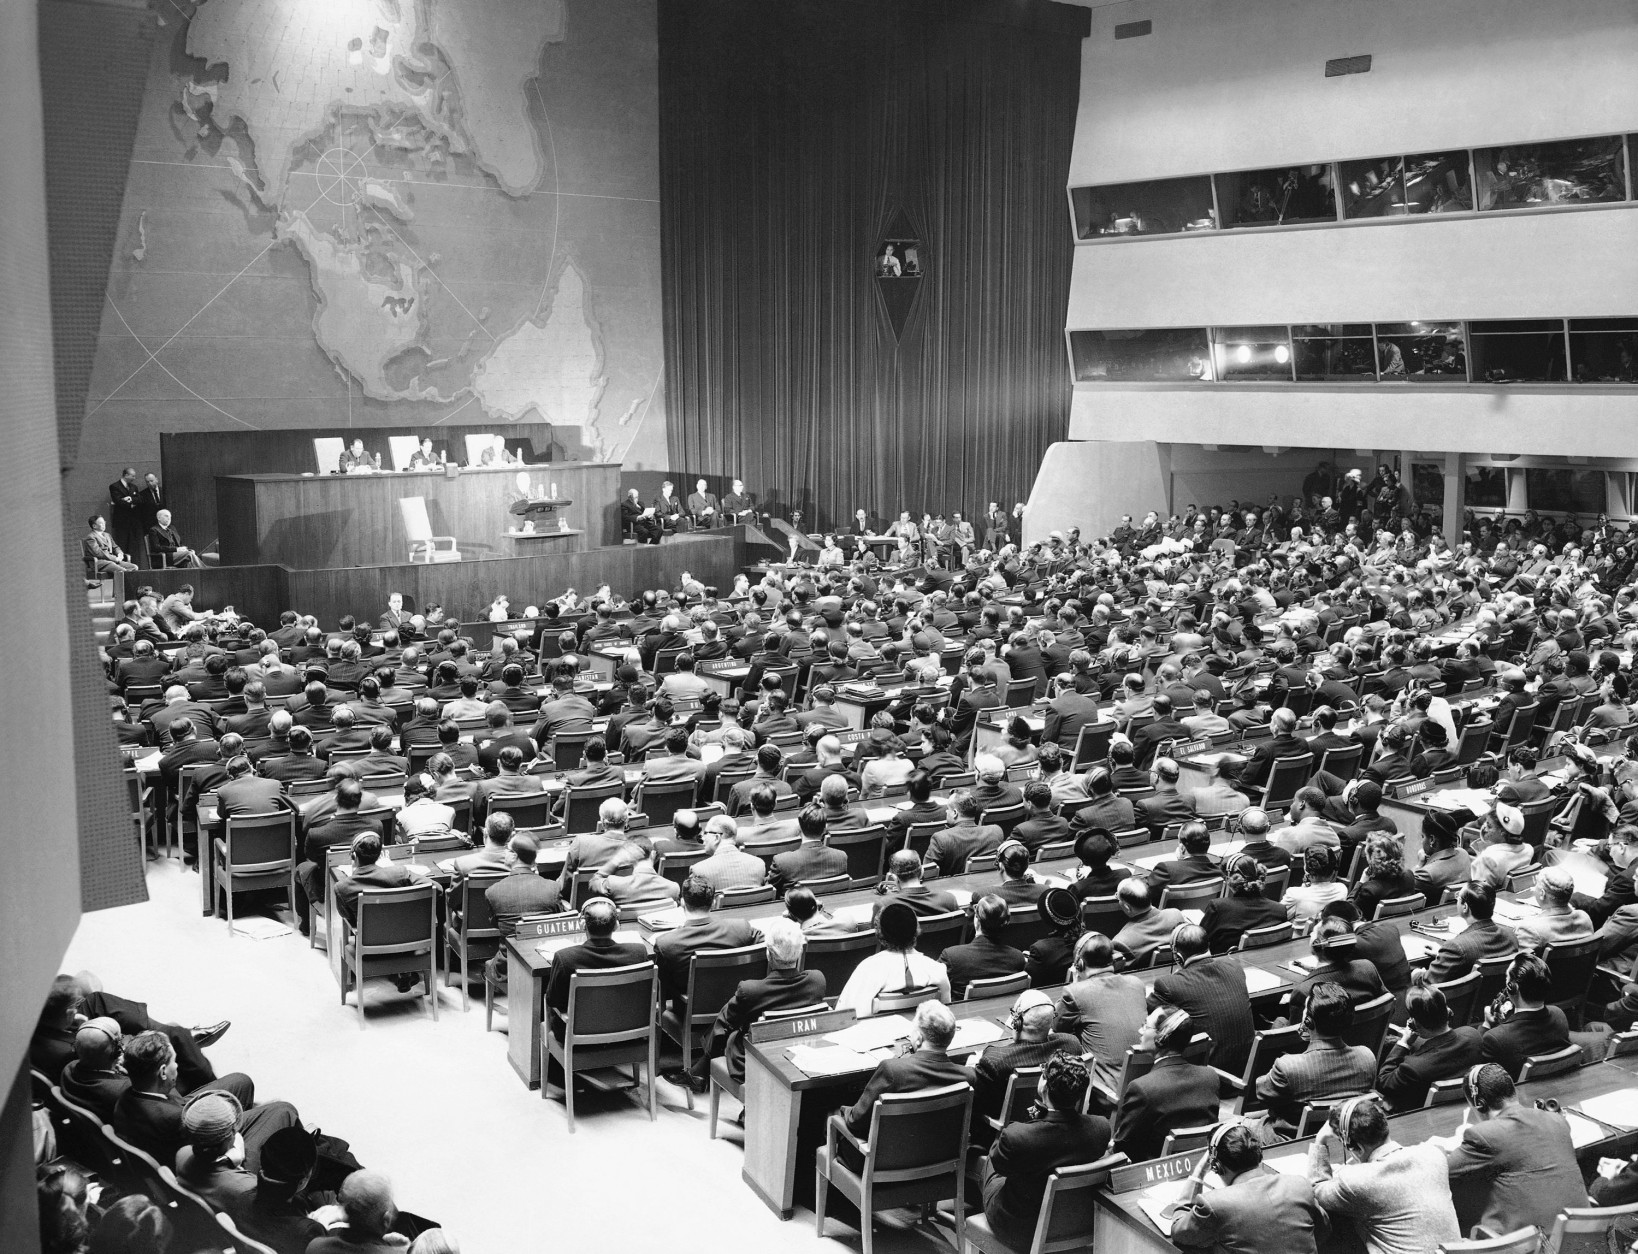 Every seat in the United Nations General Assembly is filled as President Harry S. Truman addresses the assembly at Flushing Meadow, New York, Oct. 24, 1950 on the fifth anniversary of the U.N. charter. (AP Photo)